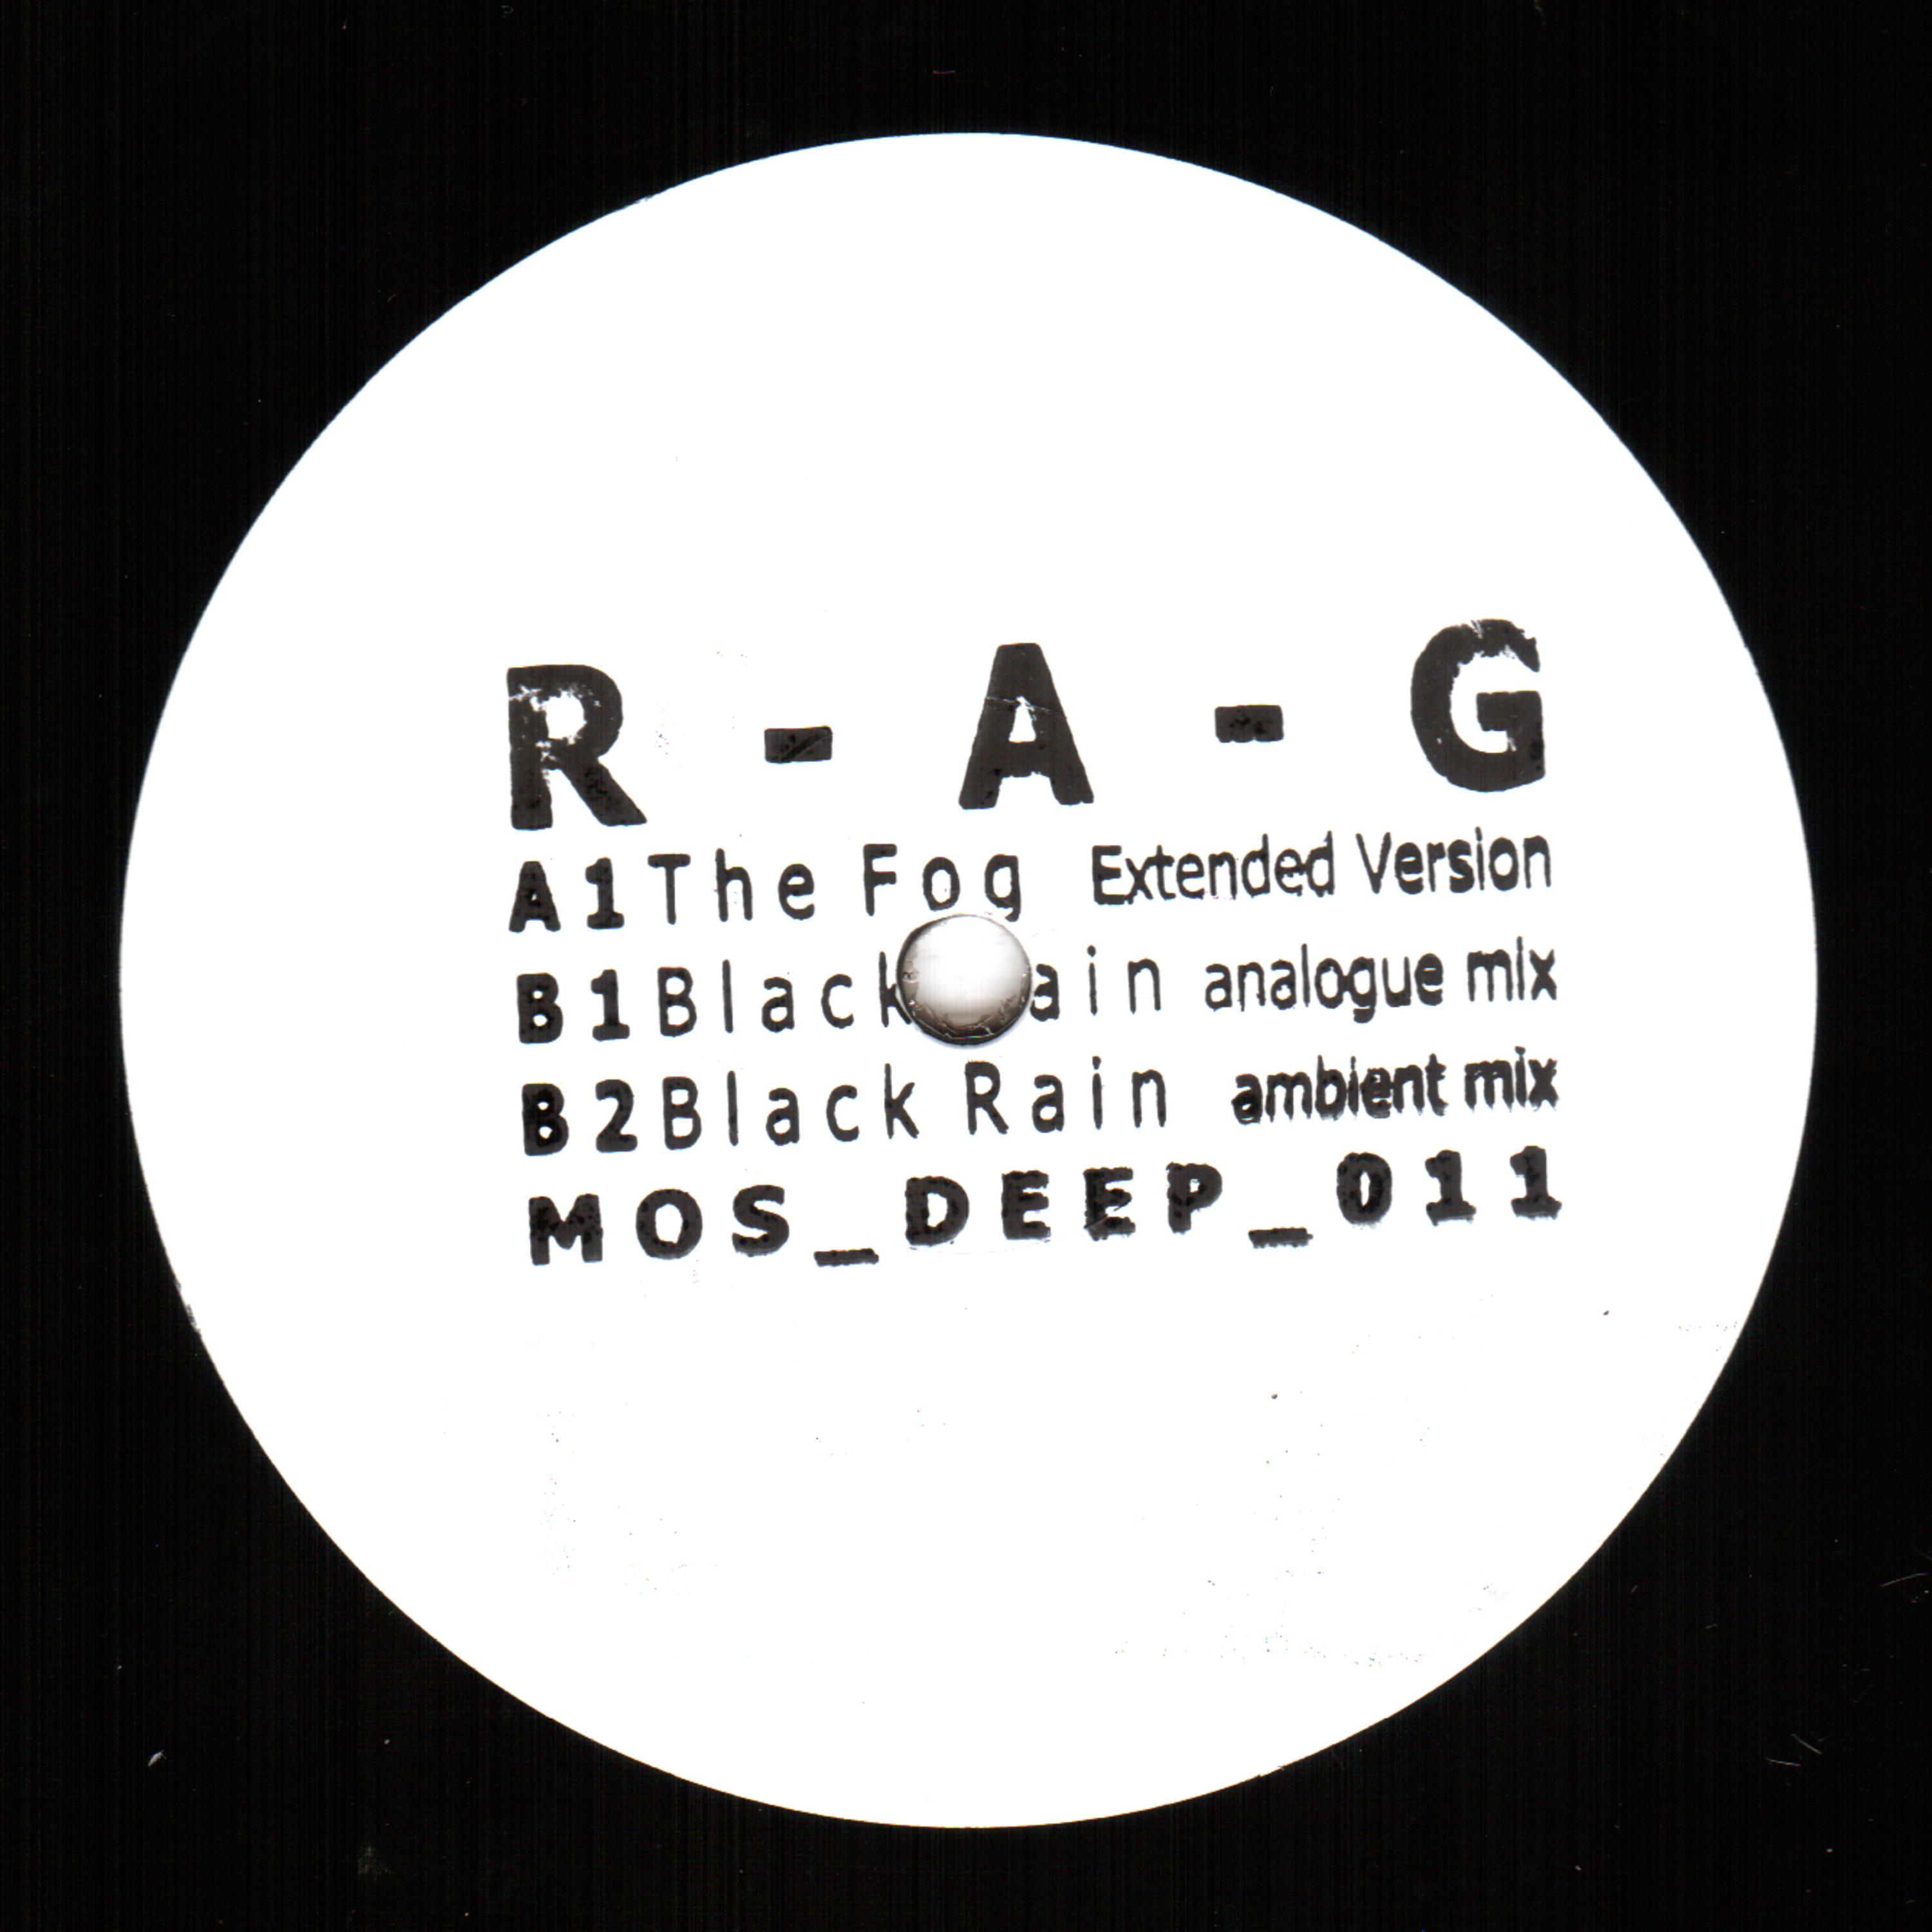 R-A-G - The Fog (Extended Version)